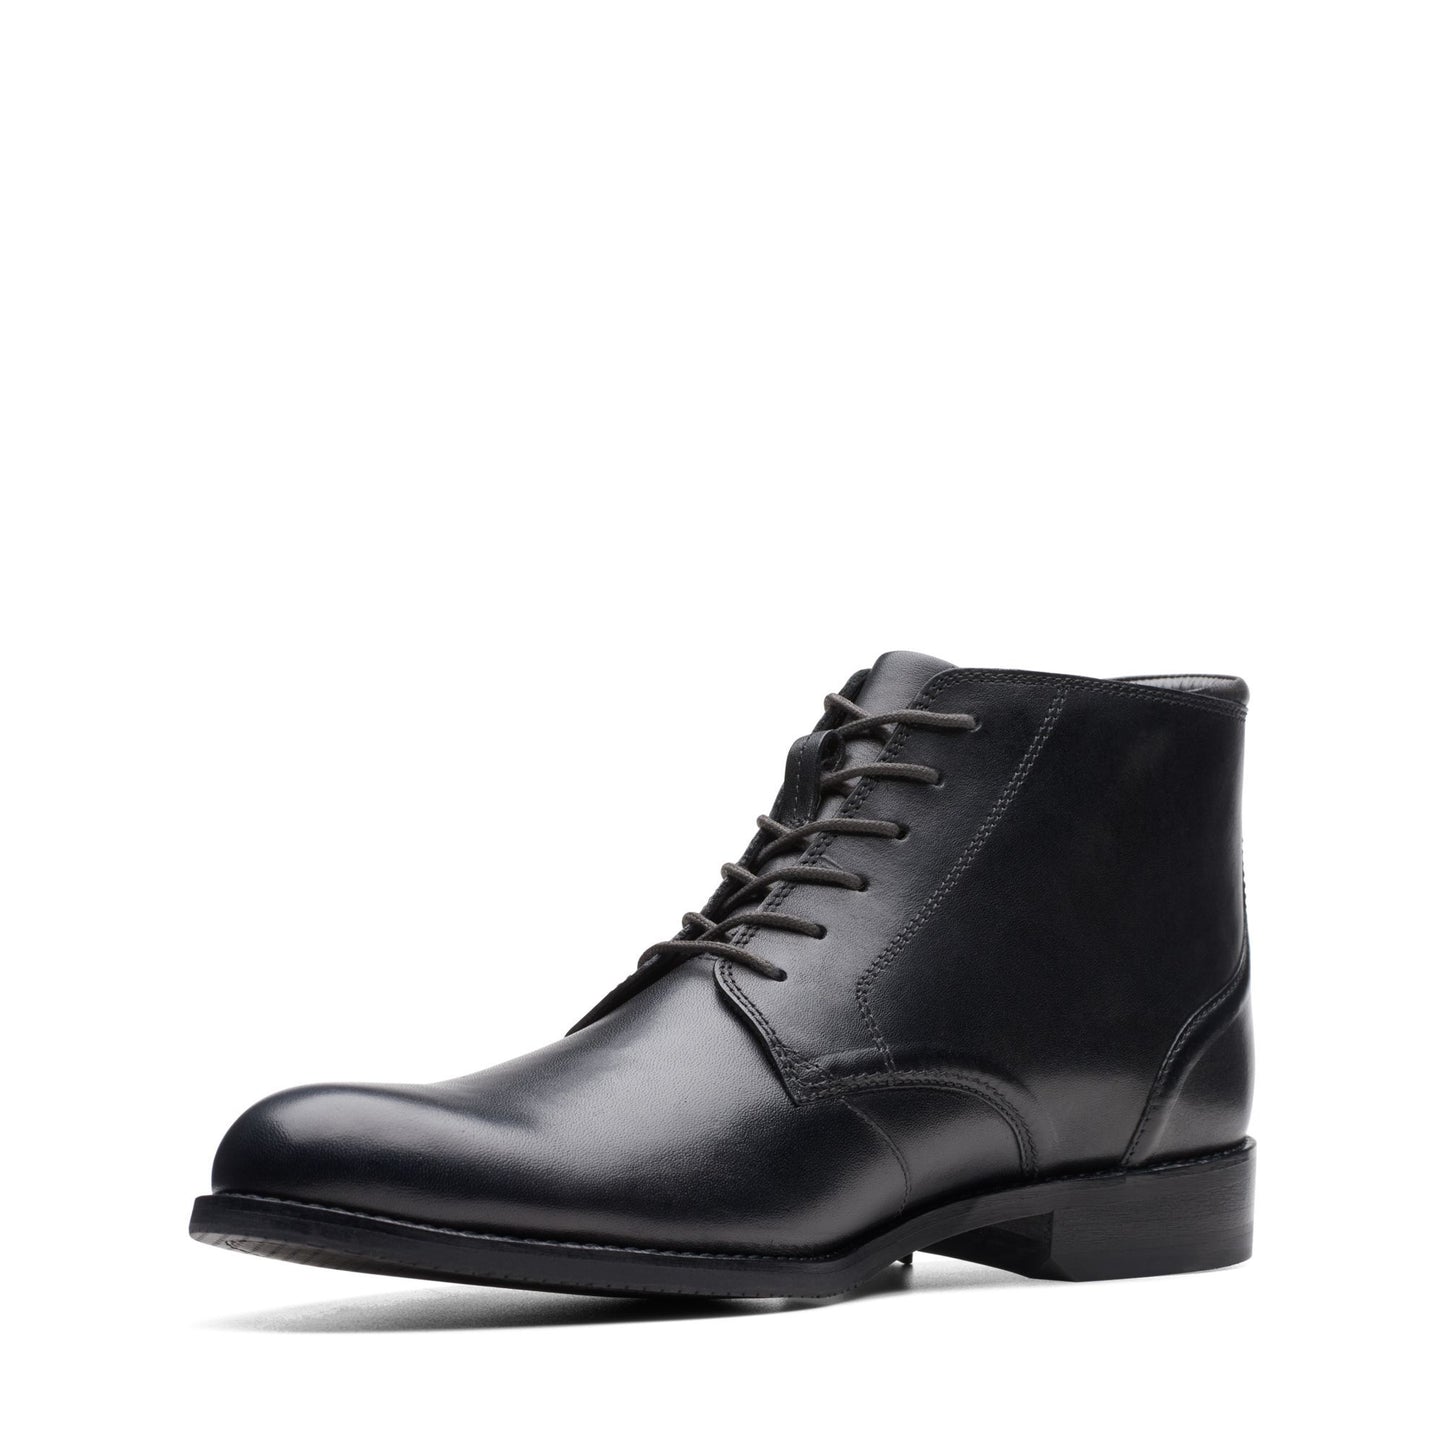 Clarks Craft Arlo Hi Ankle Boots Black leather